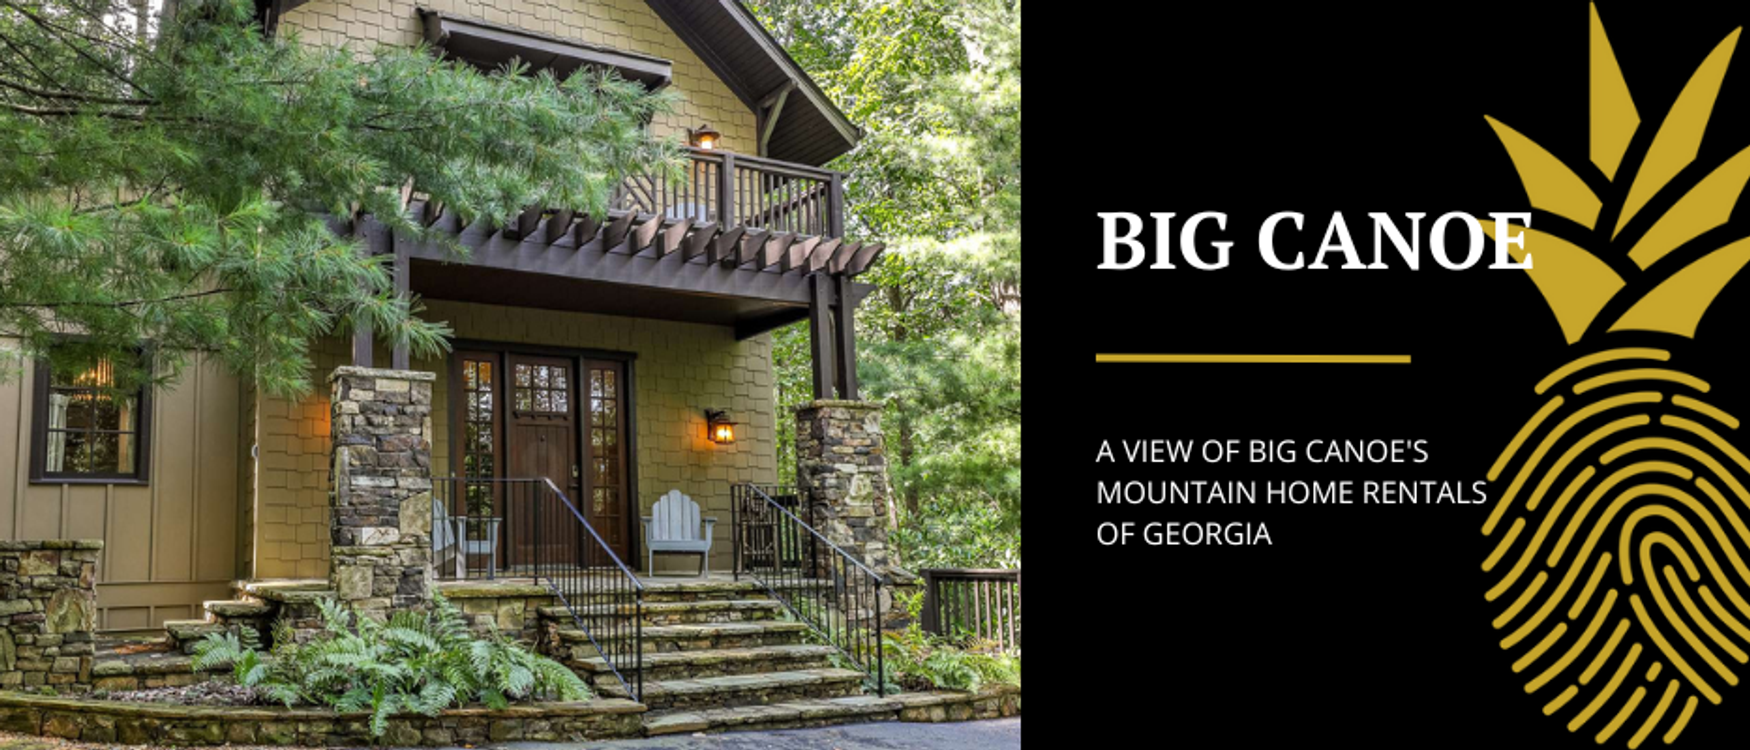 A view of Big Canoe's Mountain Home Rentals of Georgia services